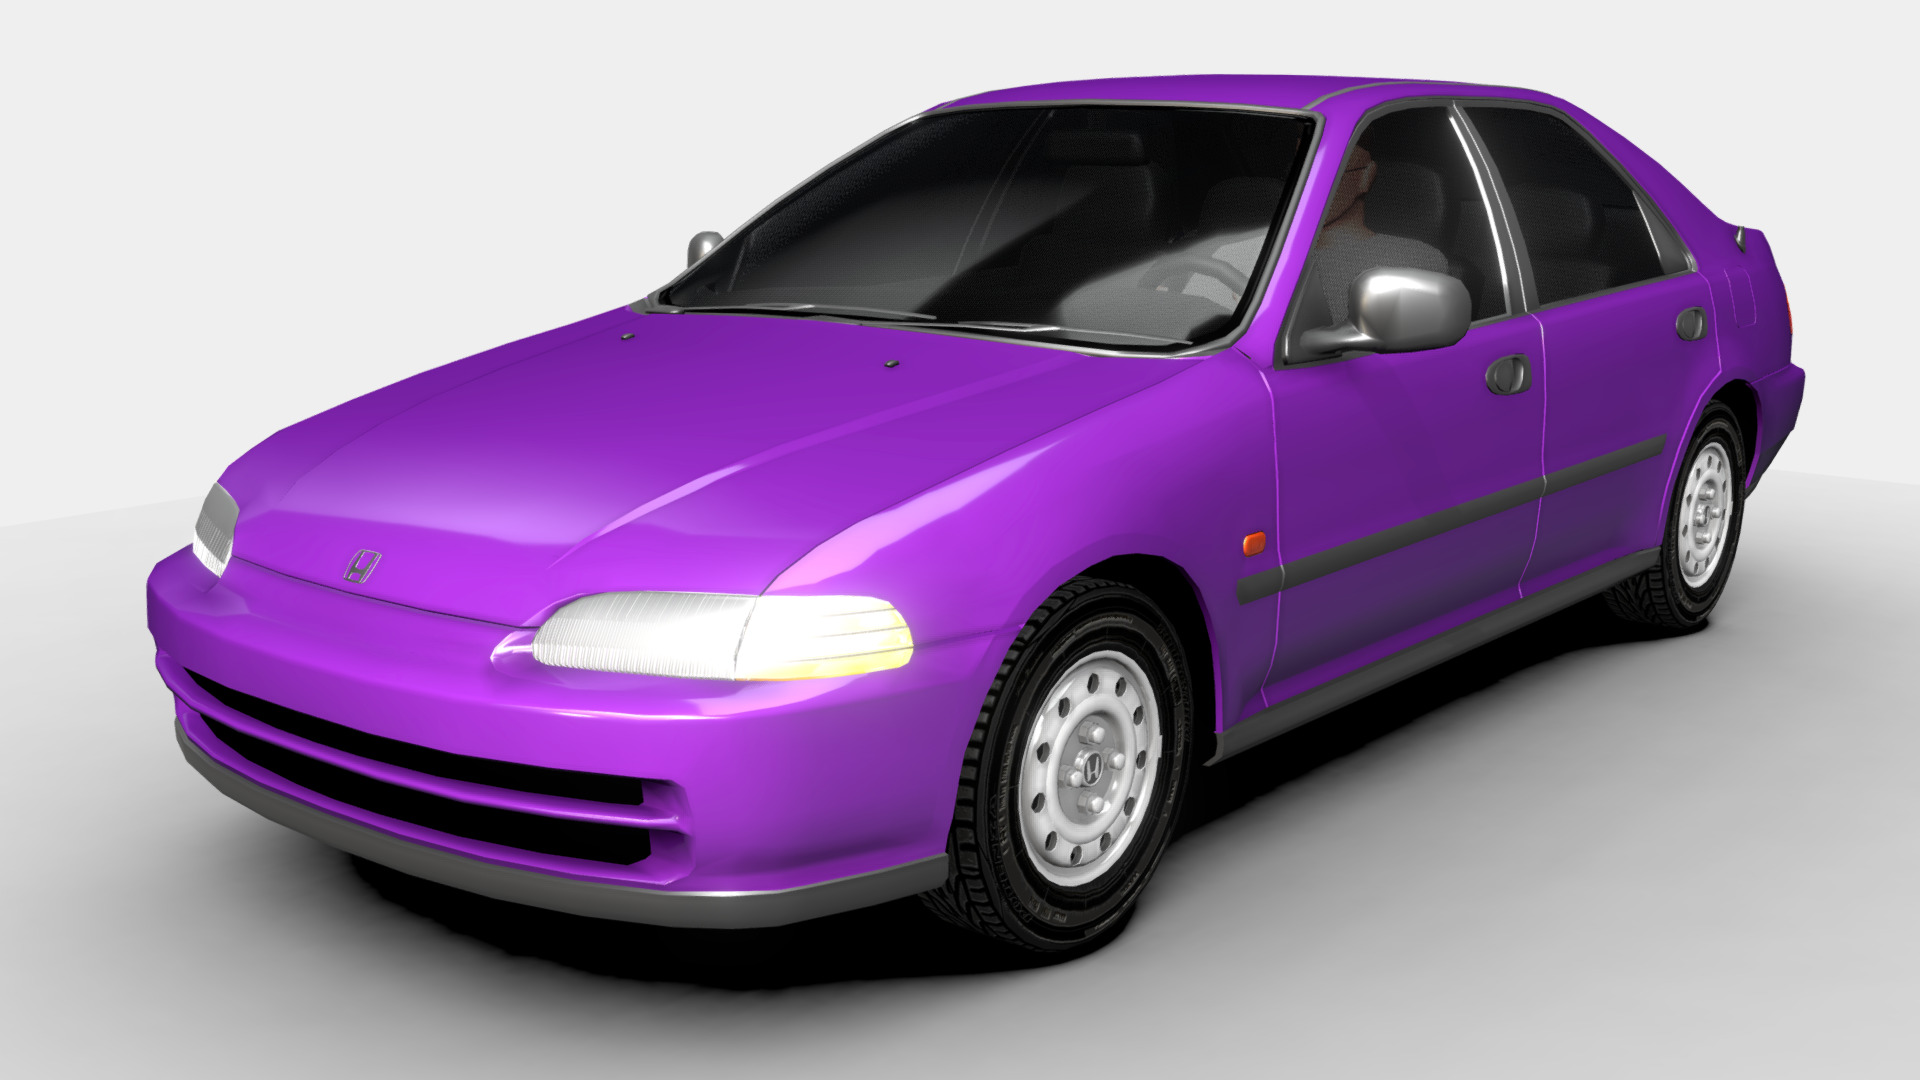 3D model Honda Civic Sedan (EG9) - This is a 3D model of the Honda Civic Sedan (EG9). The 3D model is about a purple car with a white background.